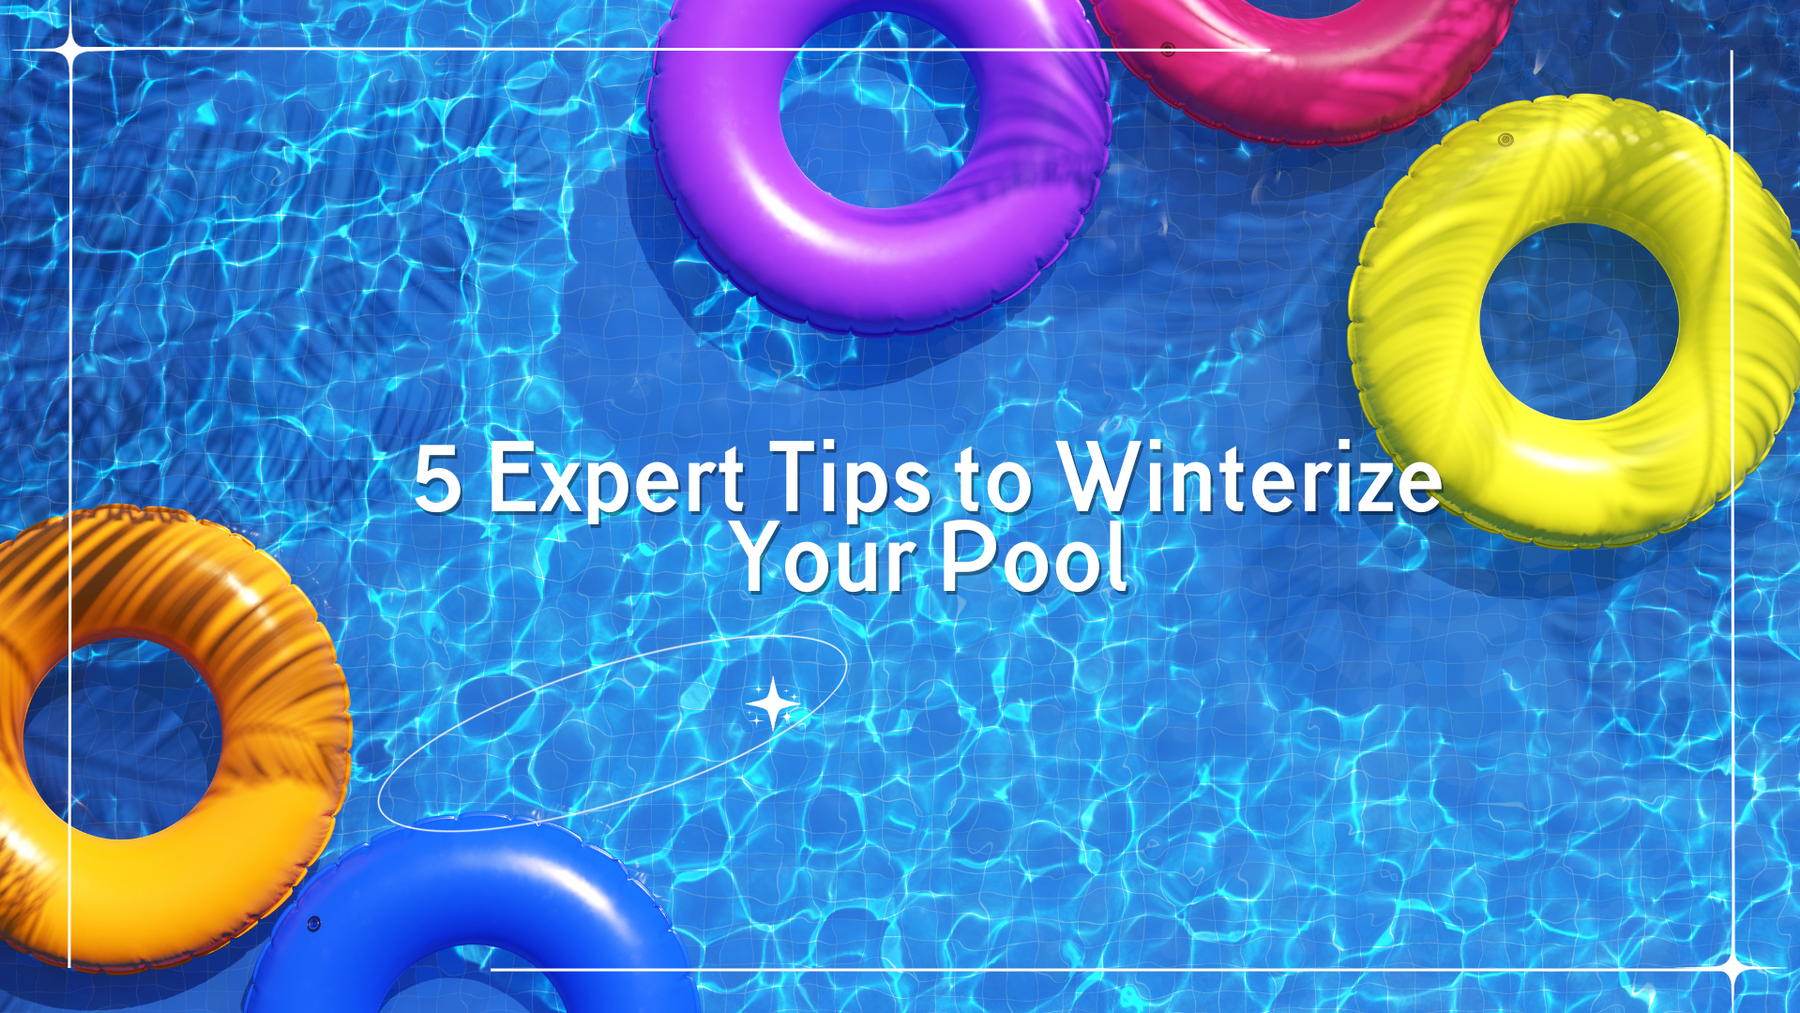 5 Expert Tips to Winterize Your Pool